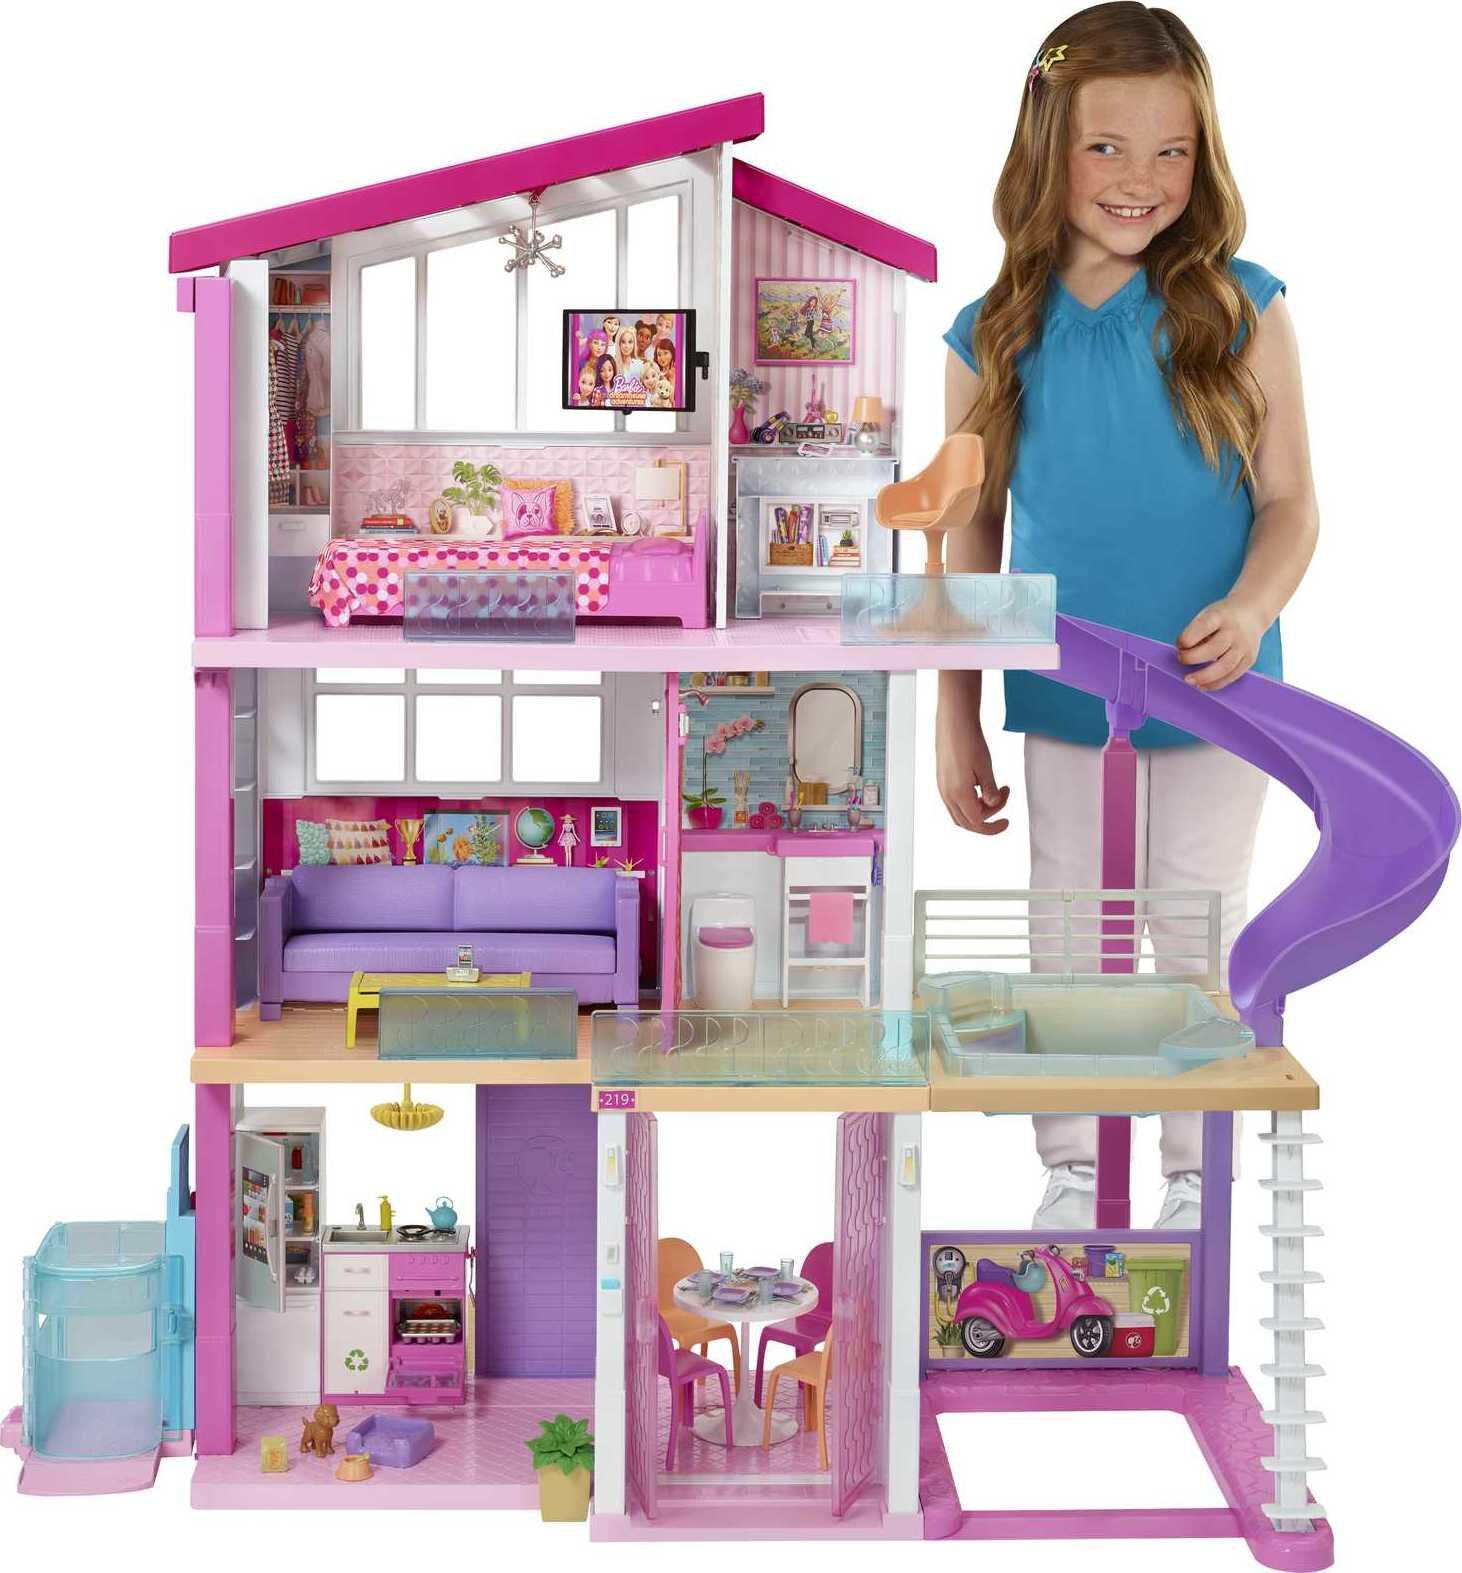 Barbie DreamHouse Dollhouse with 70+ Accessories, Working Elevator, Lights & Sounds - image 1 of 7